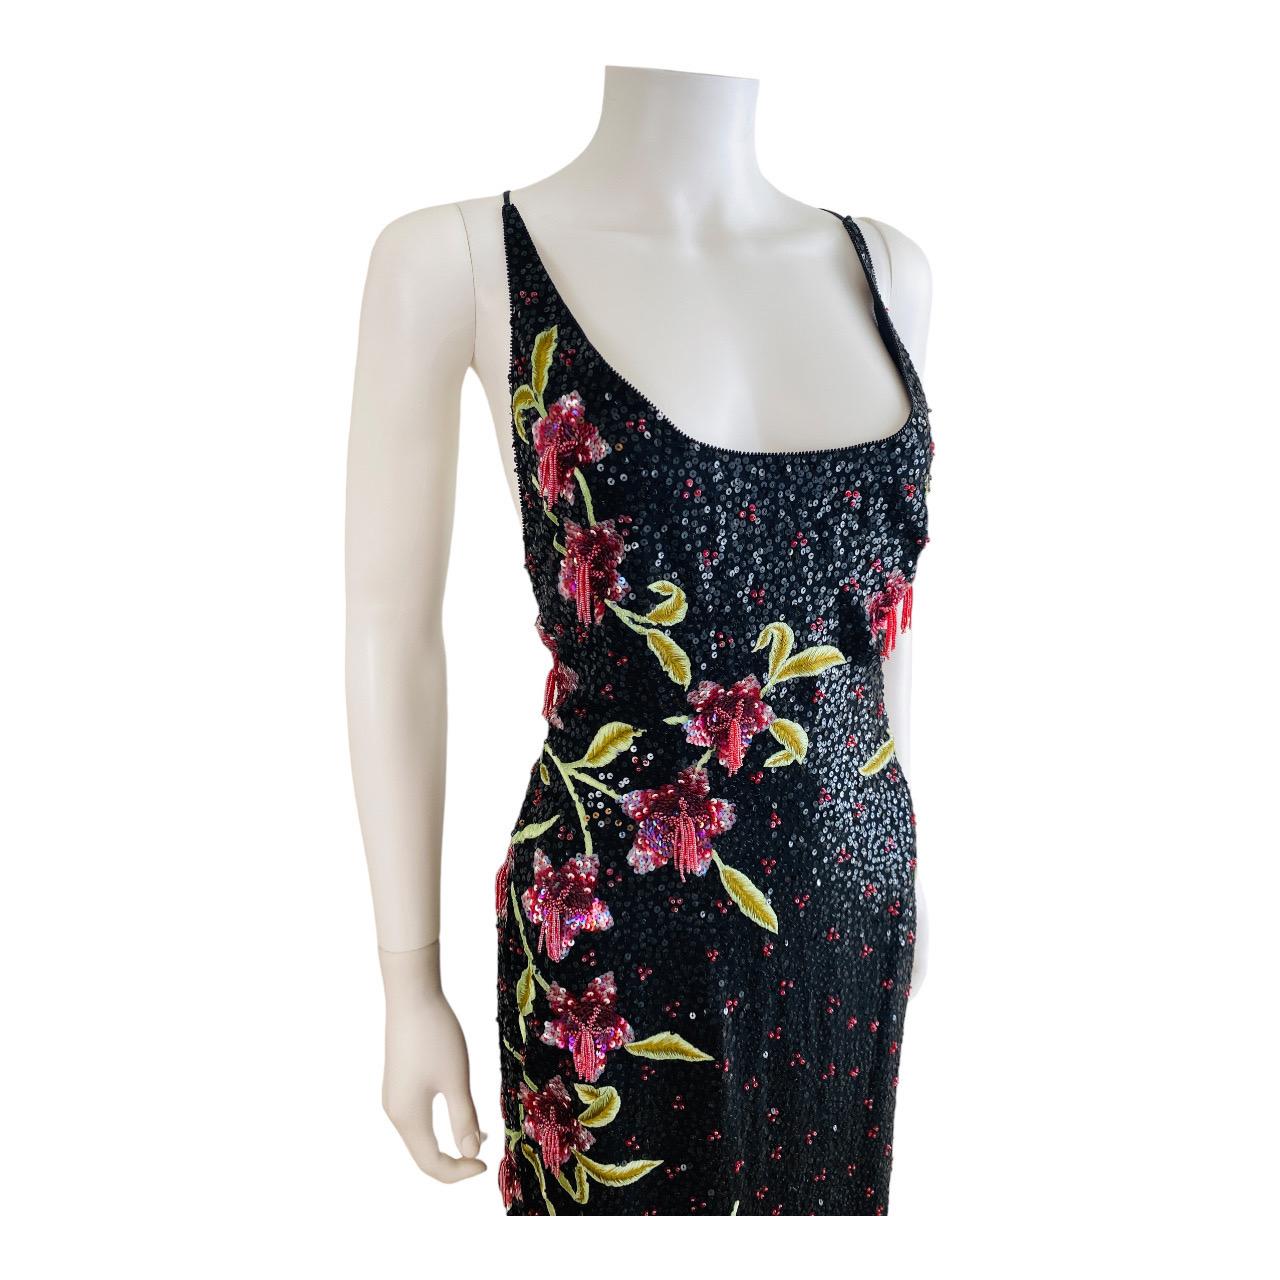 Women's Vintage 2002 Escada Hand Beaded Sequin Floral Maxi Dress Gown Black Pink Flowers